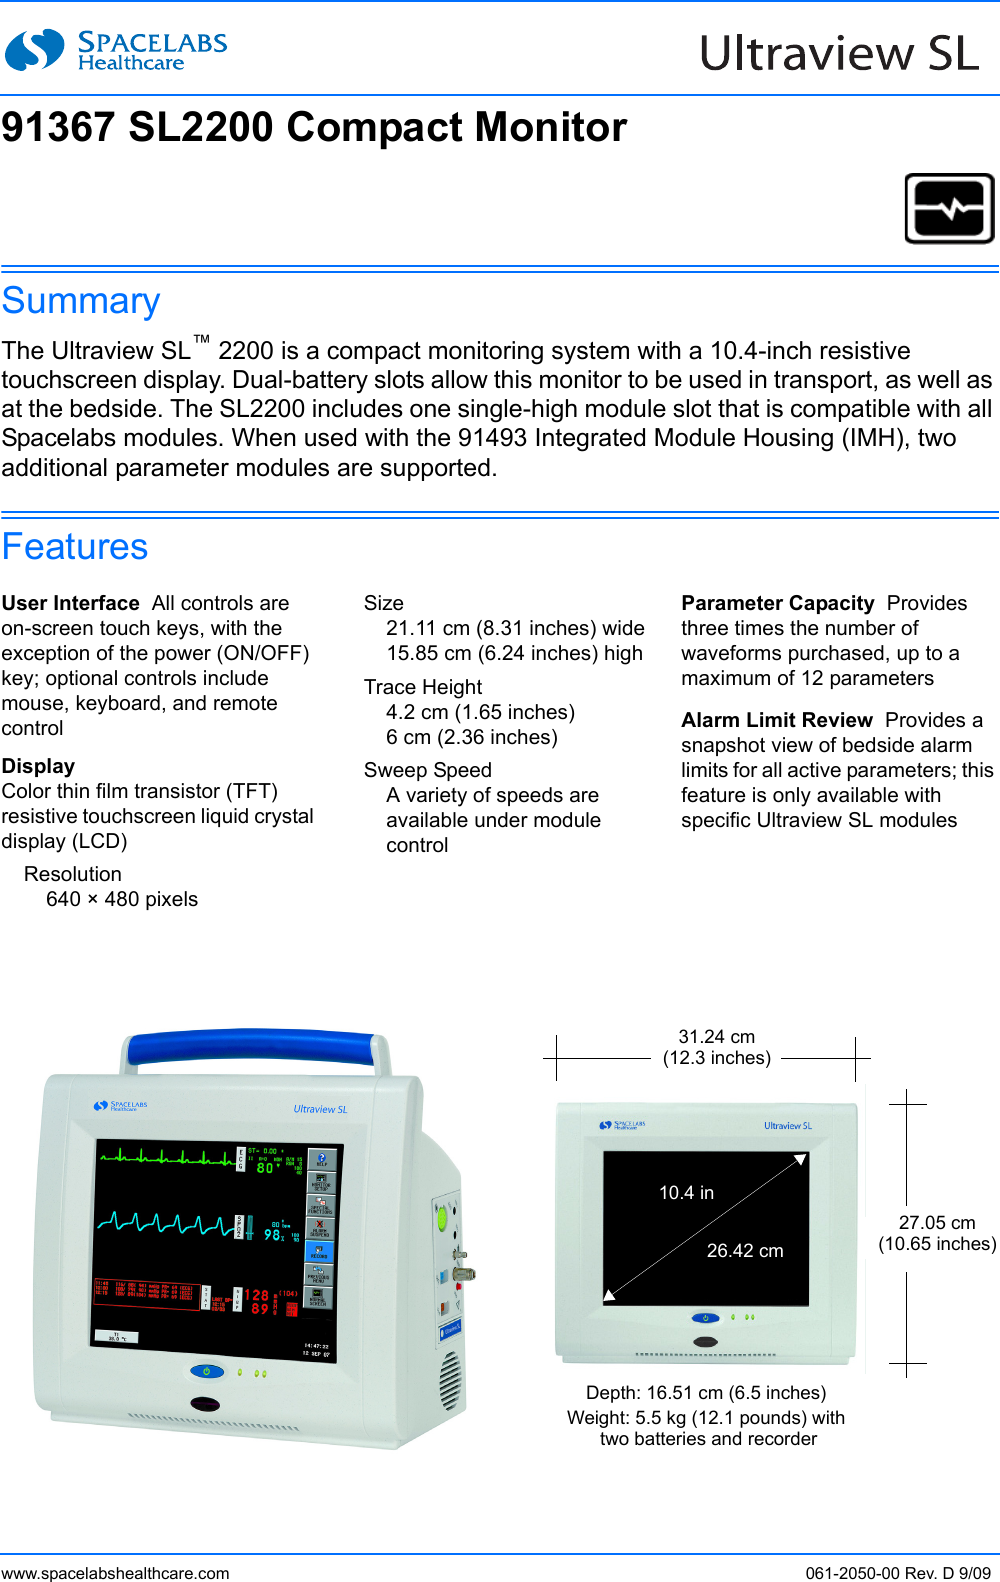 www.spacelabshealthcare.com 061-2050-00 Rev. D 9/09SummaryThe Ultraview SL™ 2200 is a compact monitoring system with a 10.4-inch resistive touchscreen display. Dual-battery slots allow this monitor to be used in transport, as well as at the bedside. The SL2200 includes one single-high module slot that is compatible with all Spacelabs modules. When used with the 91493 Integrated Module Housing (IMH), two additional parameter modules are supported.FeaturesUser Interface  All controls are on-screen touch keys, with the exception of the power (ON/OFF) key; optional controls include mouse, keyboard, and remote controlDisplayColor thin film transistor (TFT) resistive touchscreen liquid crystal display (LCD)Resolution640 × 480 pixelsSize21.11 cm (8.31 inches) wide15.85 cm (6.24 inches) highTrace Height4.2 cm (1.65 inches)6 cm (2.36 inches)Sweep SpeedA variety of speeds are available under module controlParameter Capacity  Provides three times the number of waveforms purchased, up to a maximum of 12 parametersAlarm Limit Review  Provides a snapshot view of bedside alarm limits for all active parameters; this feature is only available with specific Ultraview SL modulesDepth: 16.51 cm (6.5 inches)Weight: 5.5 kg (12.1 pounds) with two batteries and recorder27.05 cm(10.65 inches)31.24 cm(12.3 inches)26.42 cm10.4 in91367 SL2200 Compact Monitor